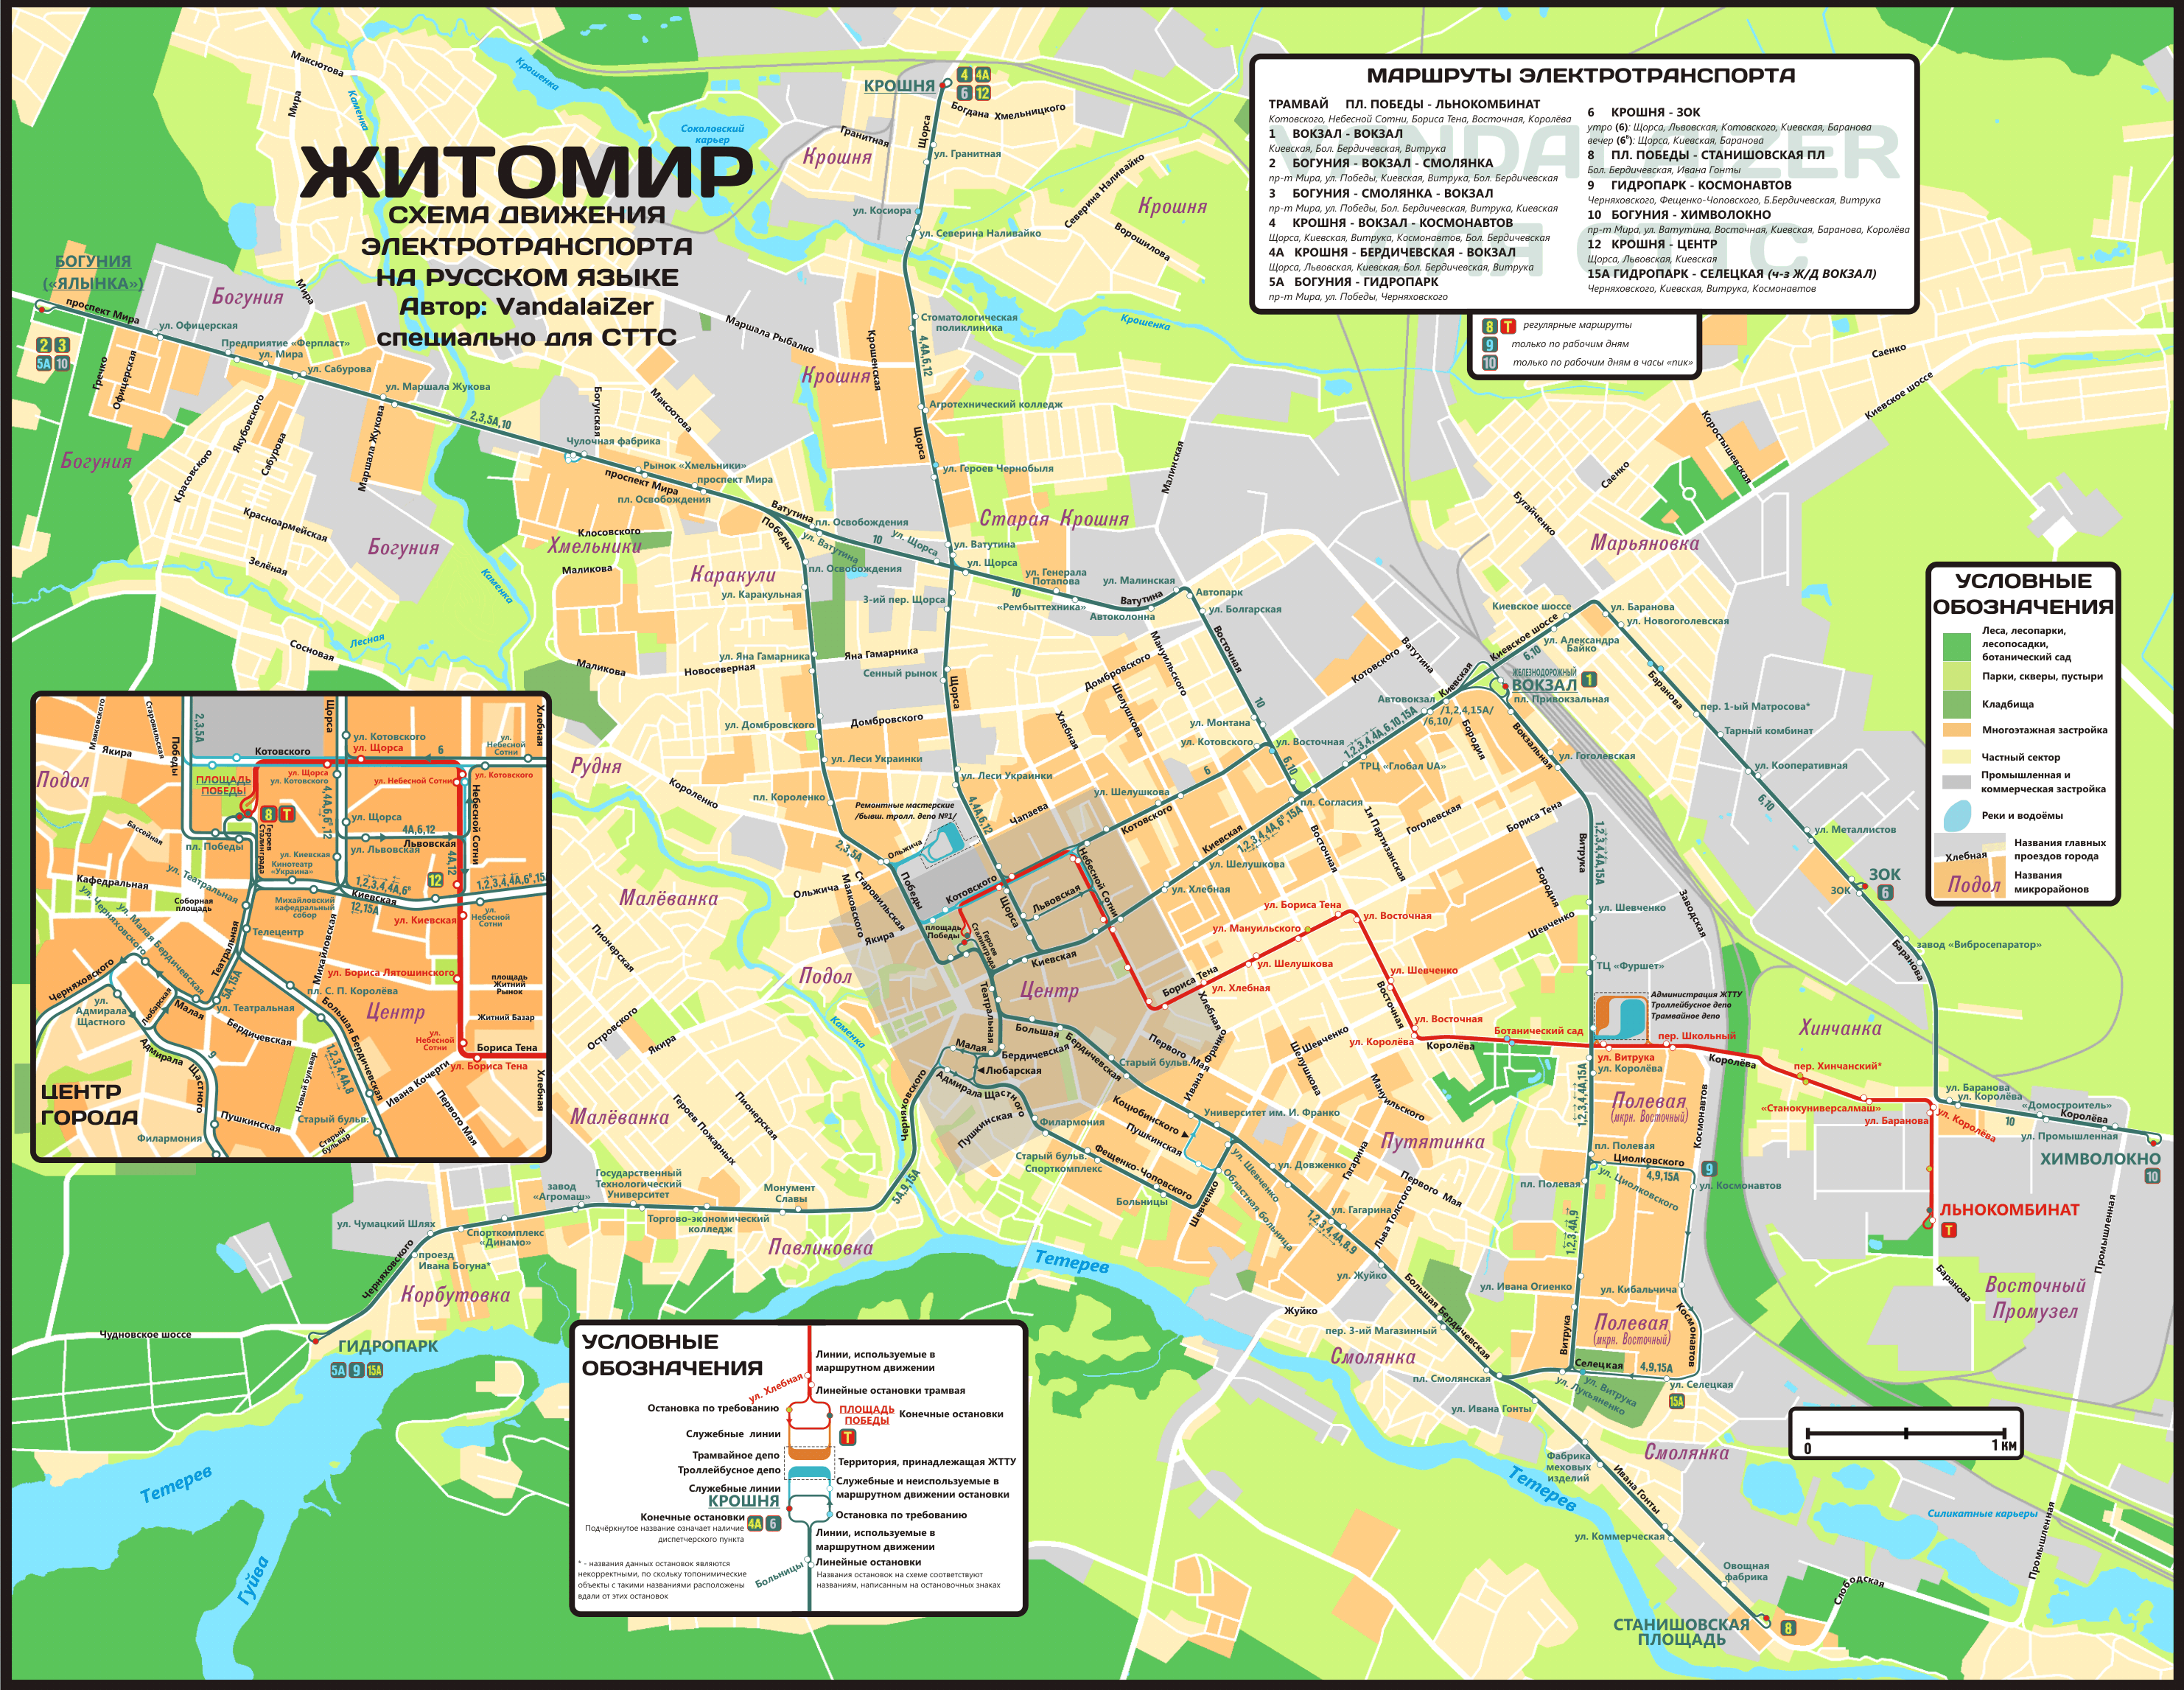 Żytomierz — Tram (since 1975) and trolleybus routes